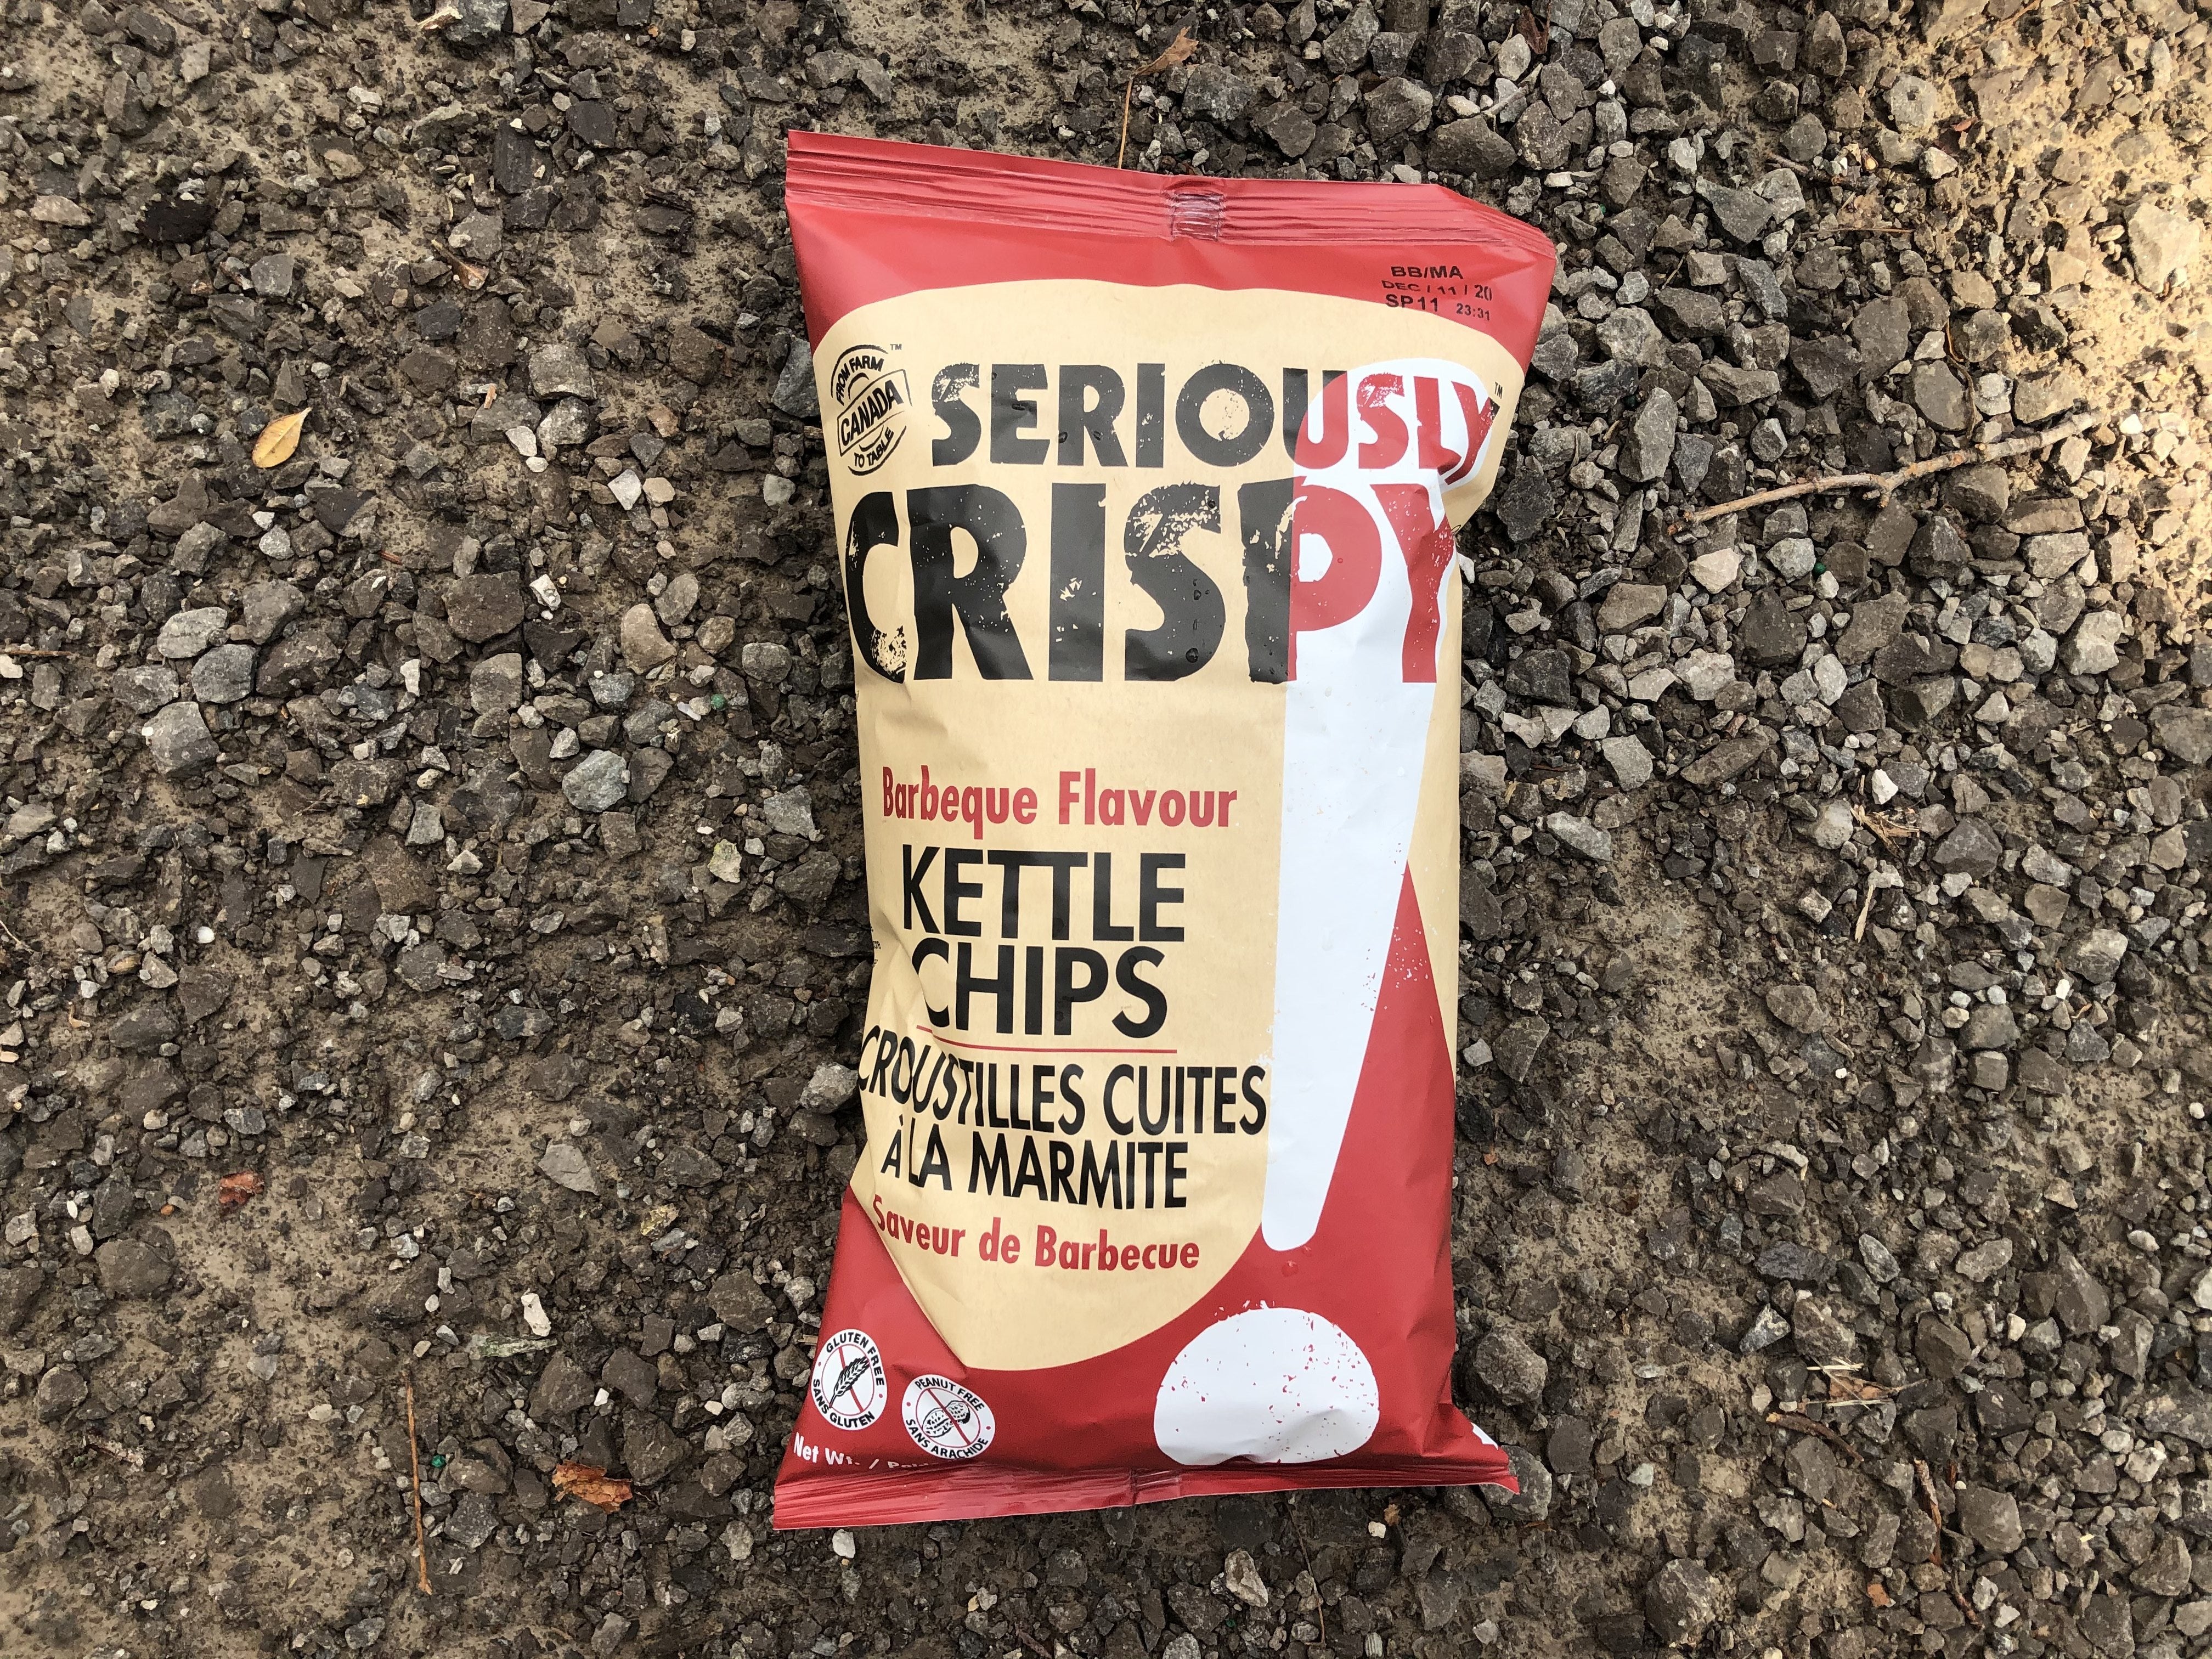 Seriously Crispy Kettle Chips